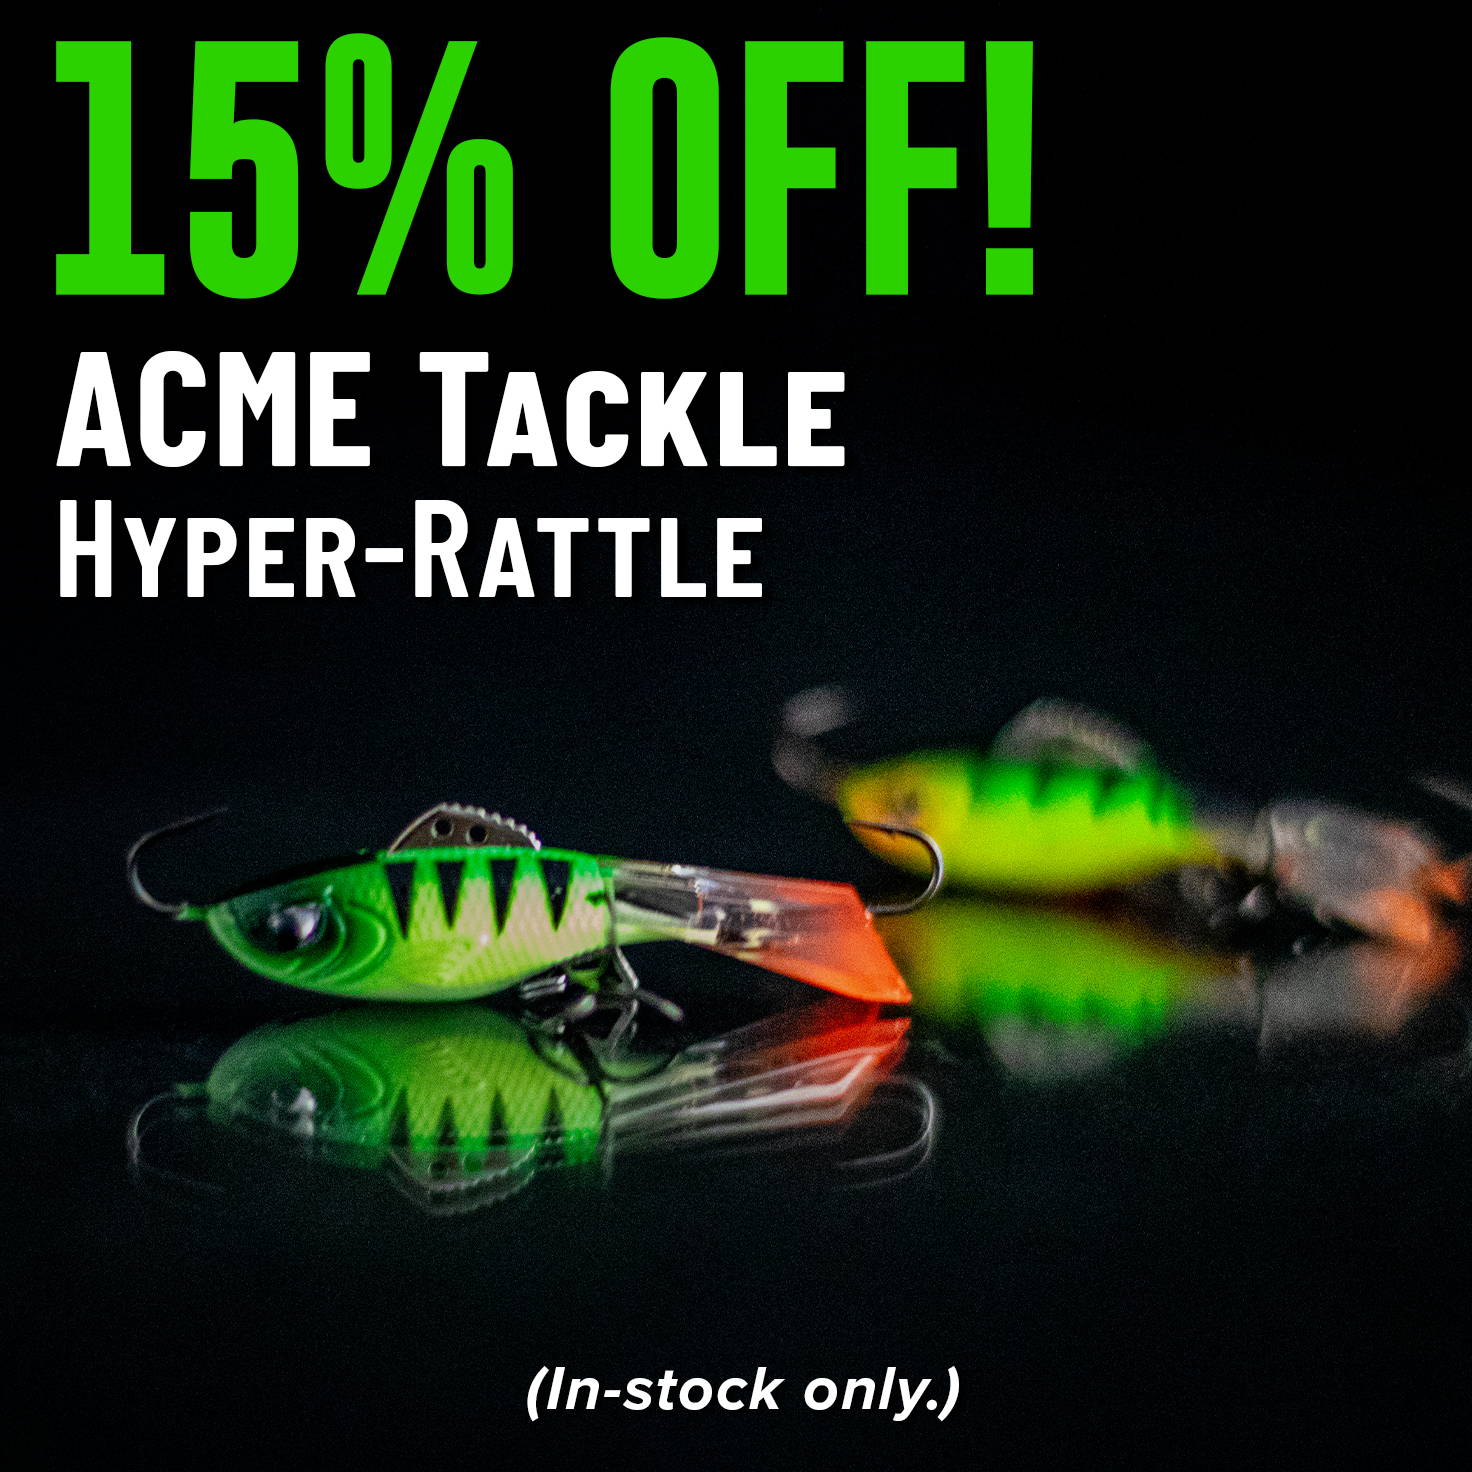 N0. 1 Acme Tackle Hyper-Rattle